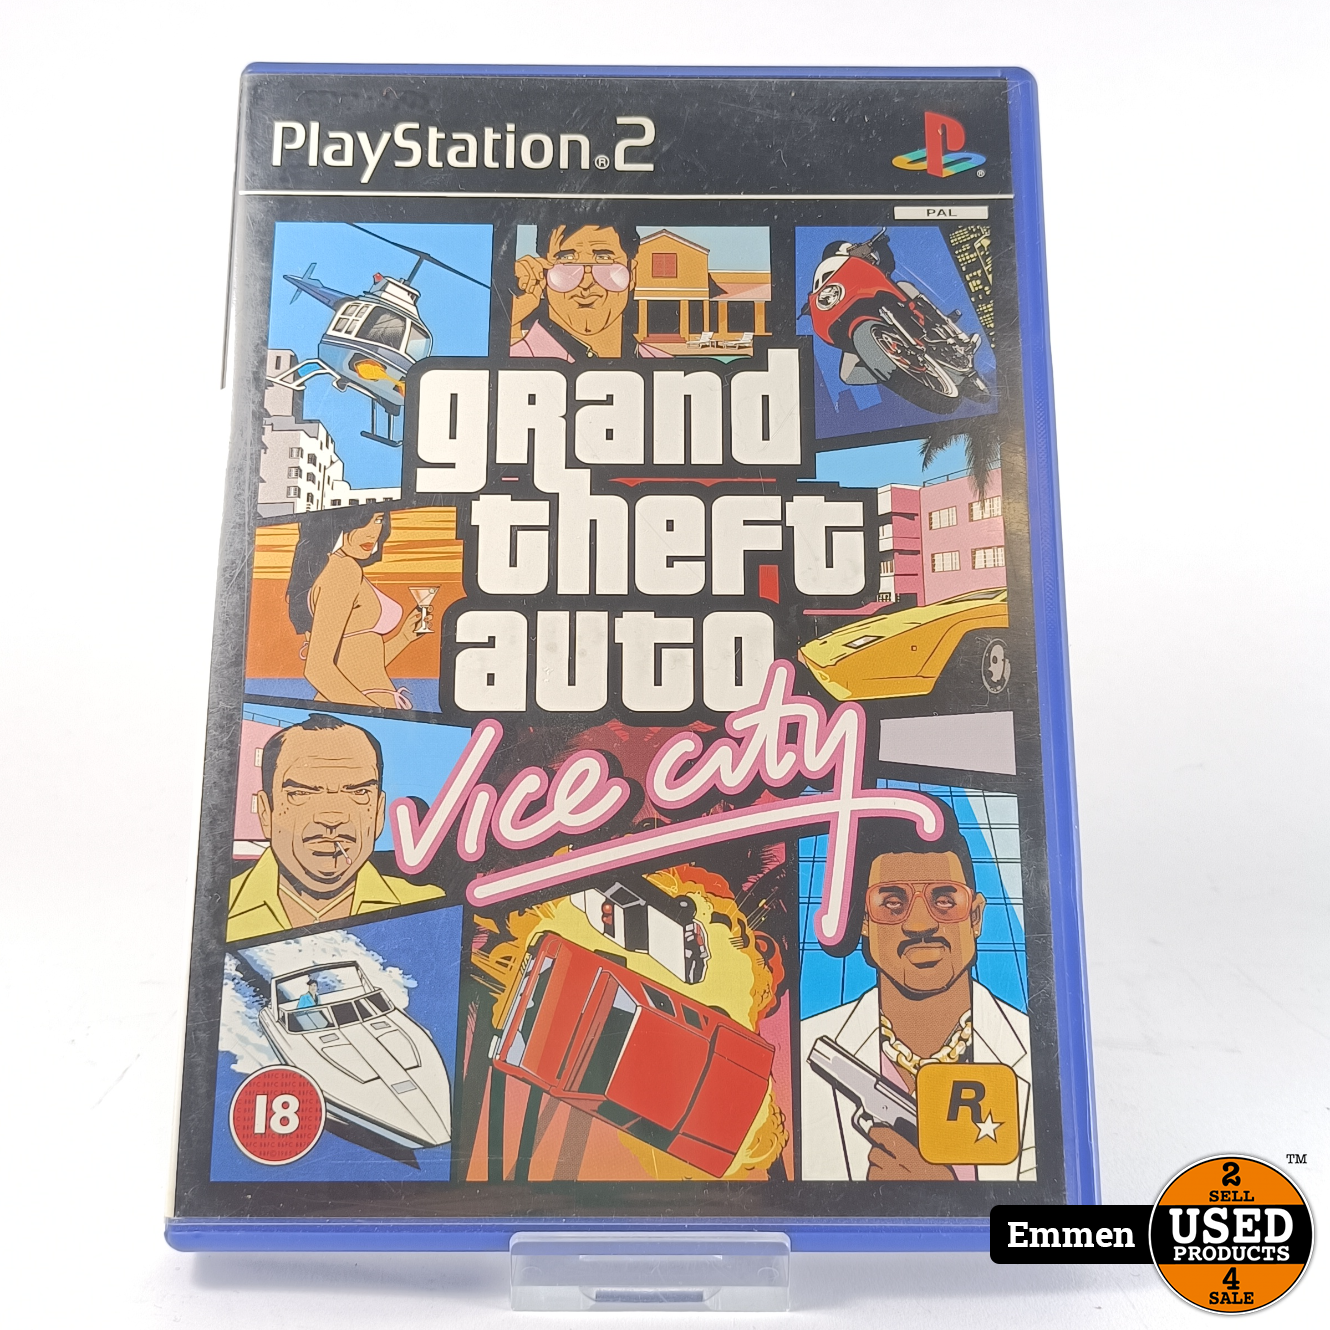 tack Hysterisch Plantage Playstation 2 Game: GTA Vice City - Used Products Emmen